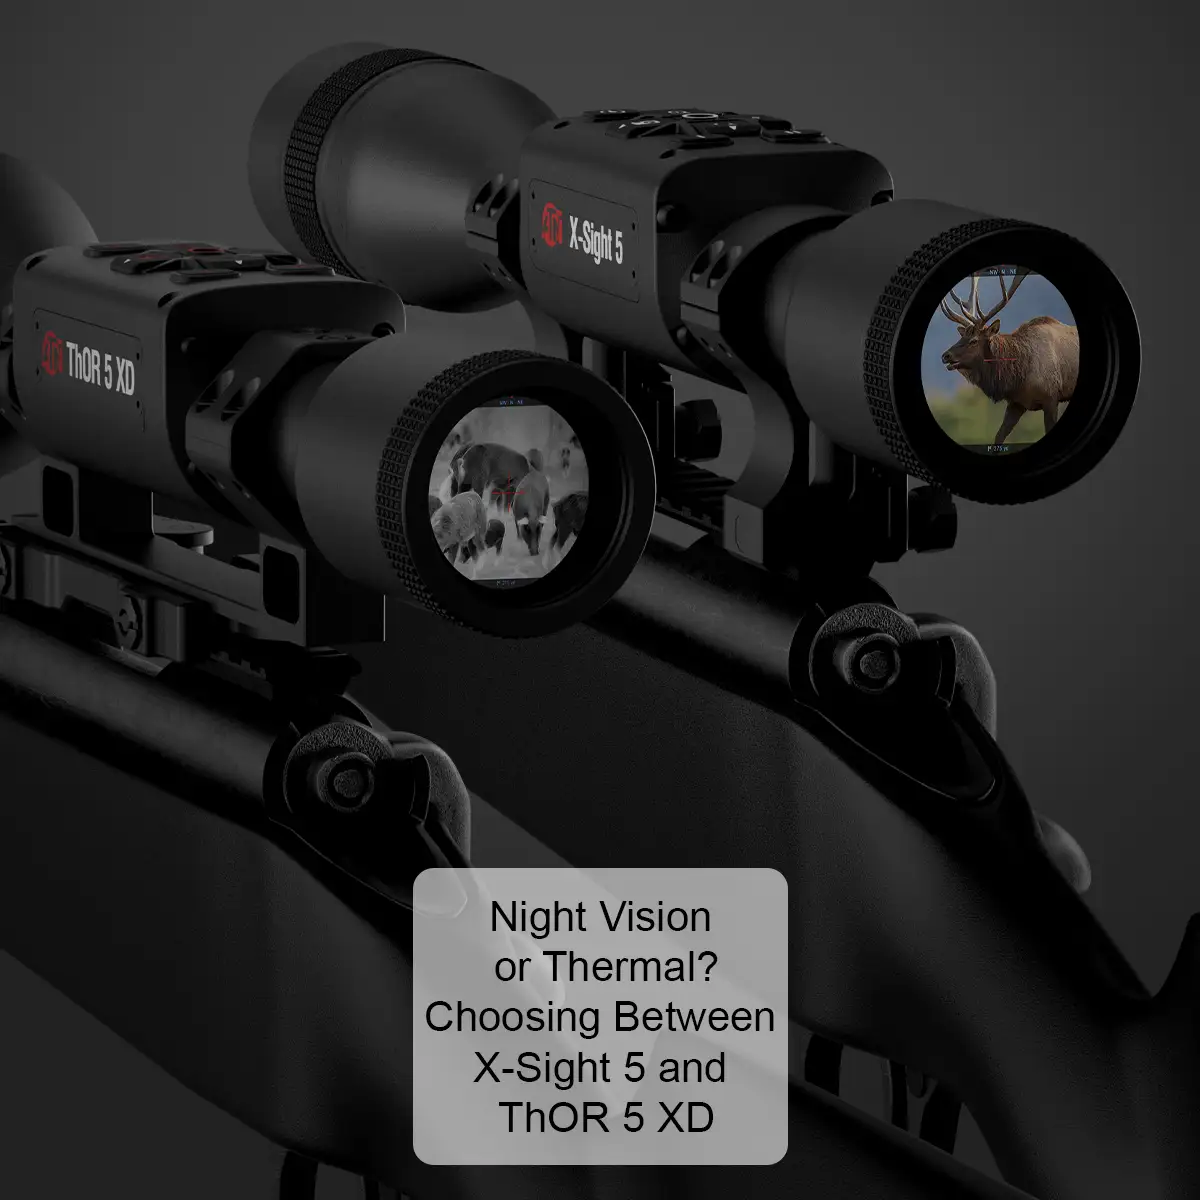 Night Vision or Thermal? Navigating the Choice Between X-Sight 5 and ThOR 5 XD